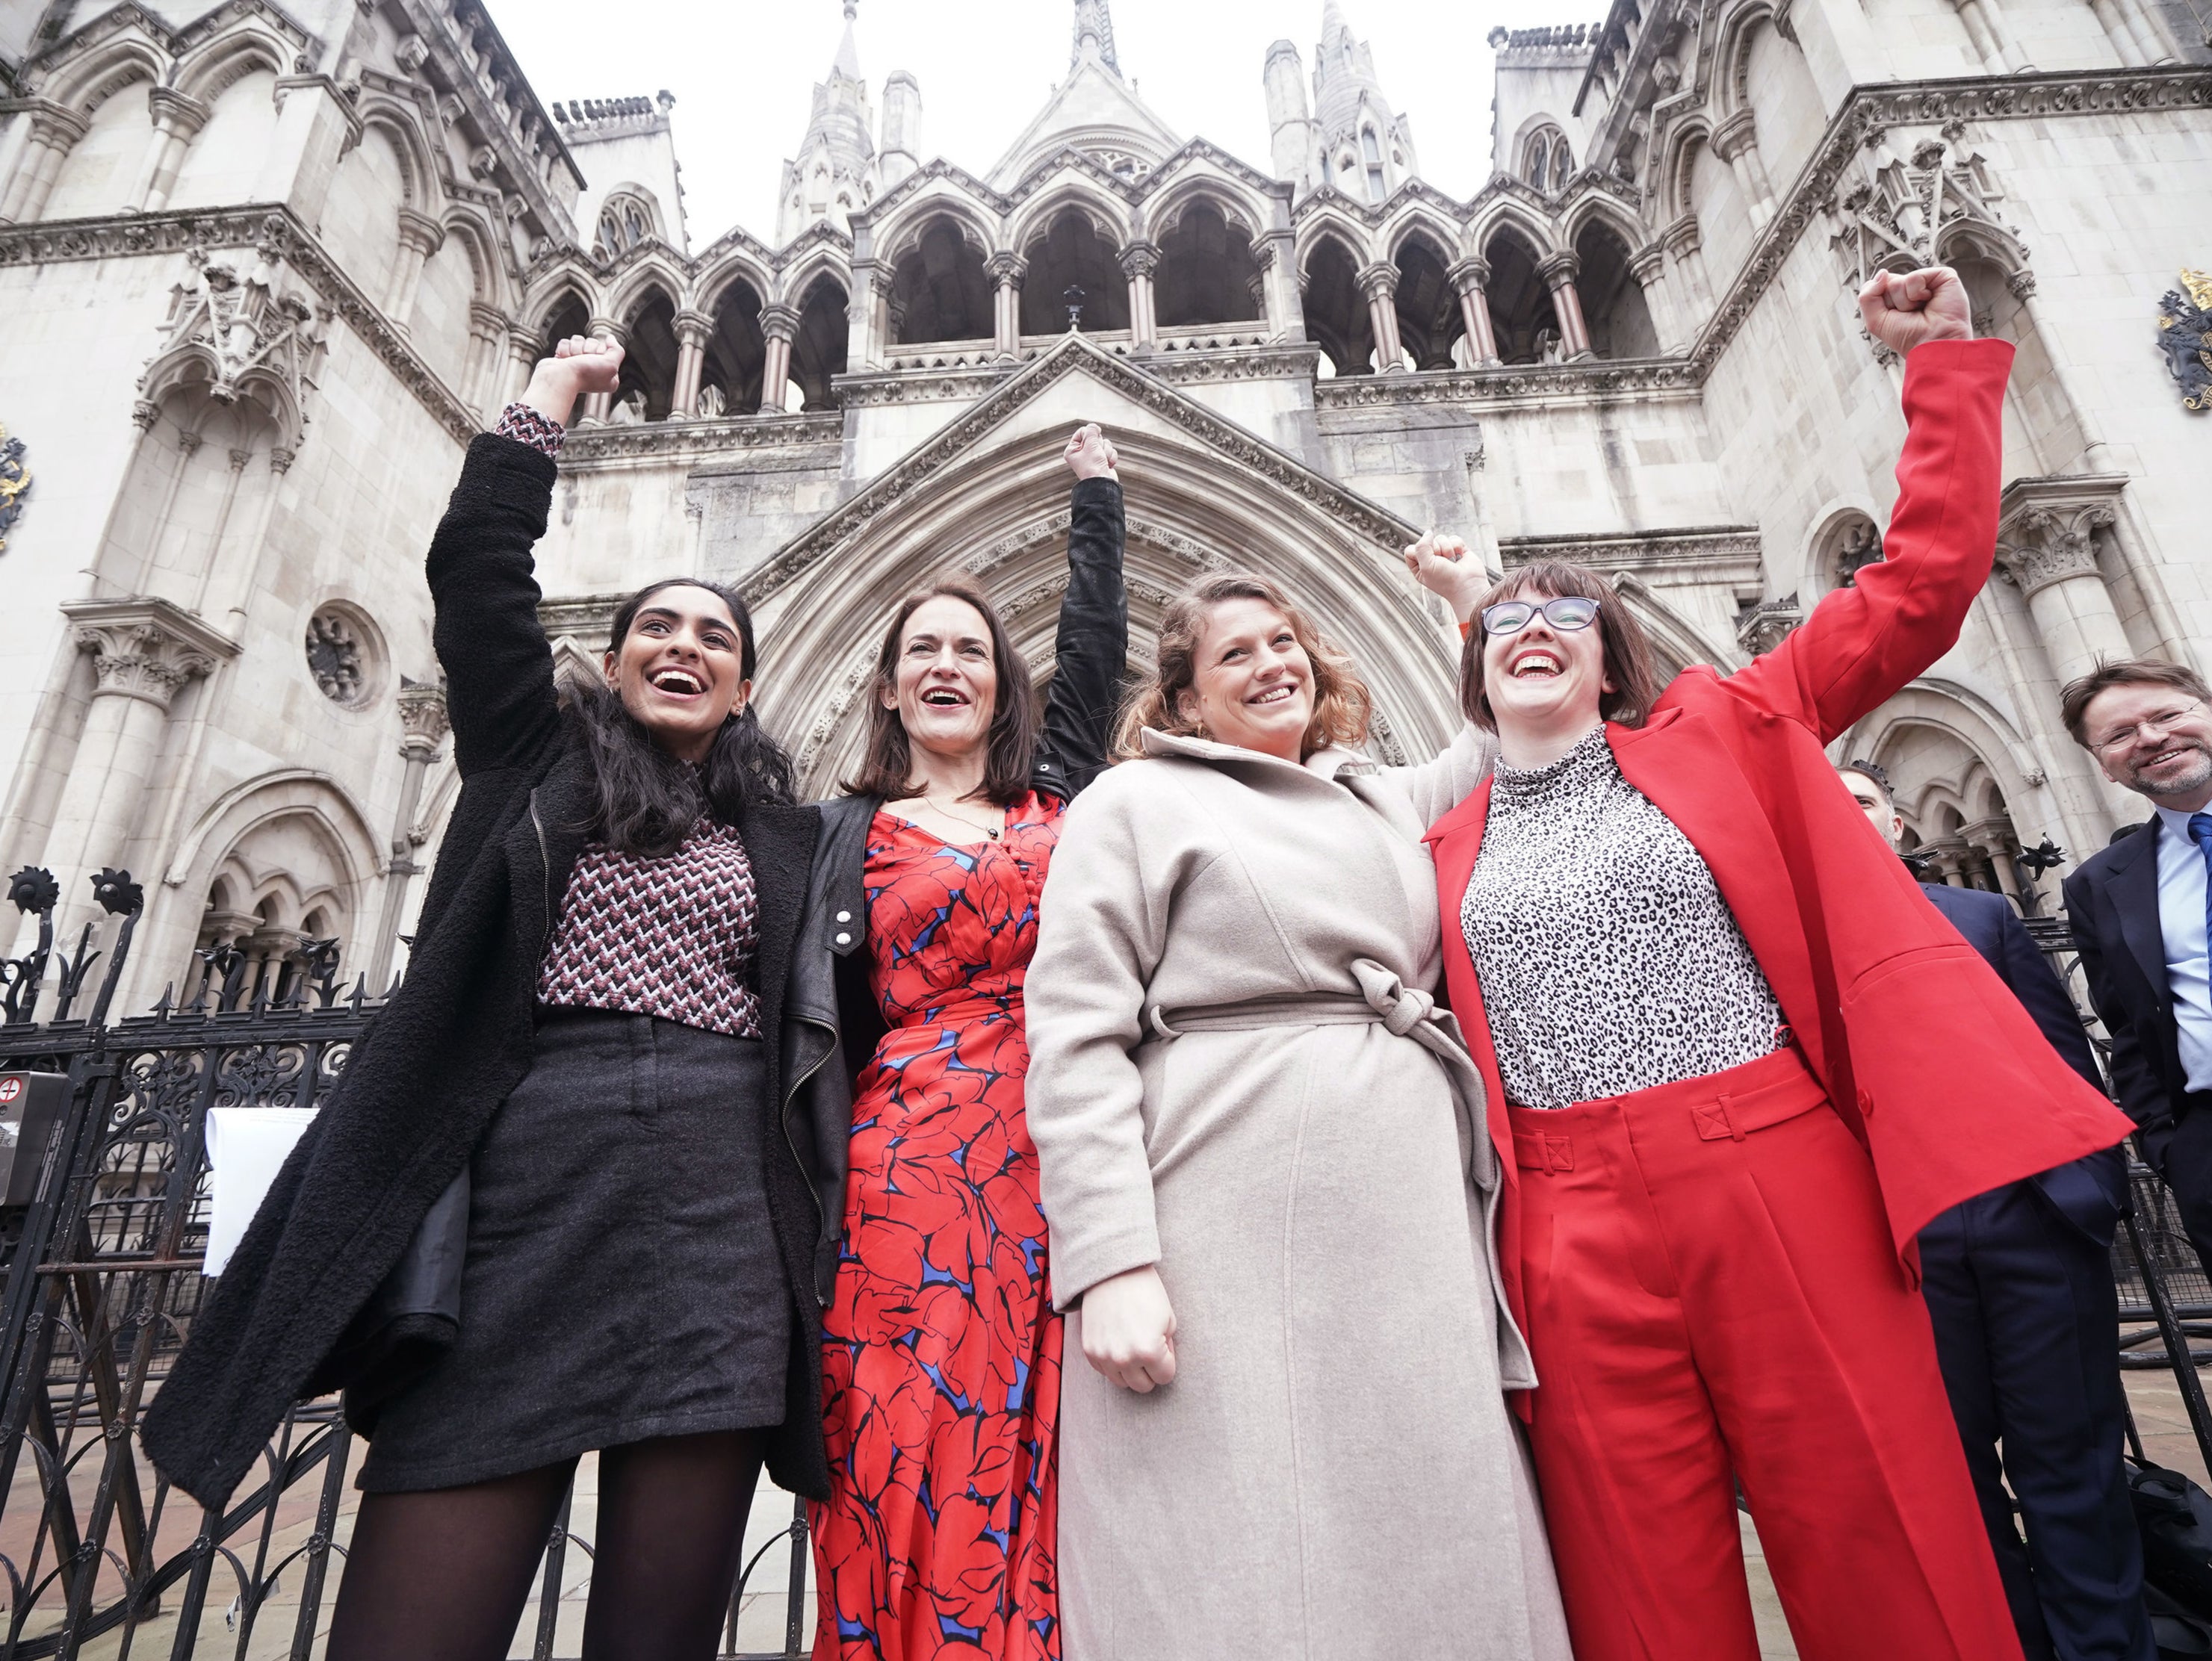 Reclaim These Streets founders (left to right) Henna Shah, Jamie Klingler, Anna Birley and Jessica Leigh celebrate outside the Royal Courts of Justice, London, after winning their legal challenge against the Metropolitan Police